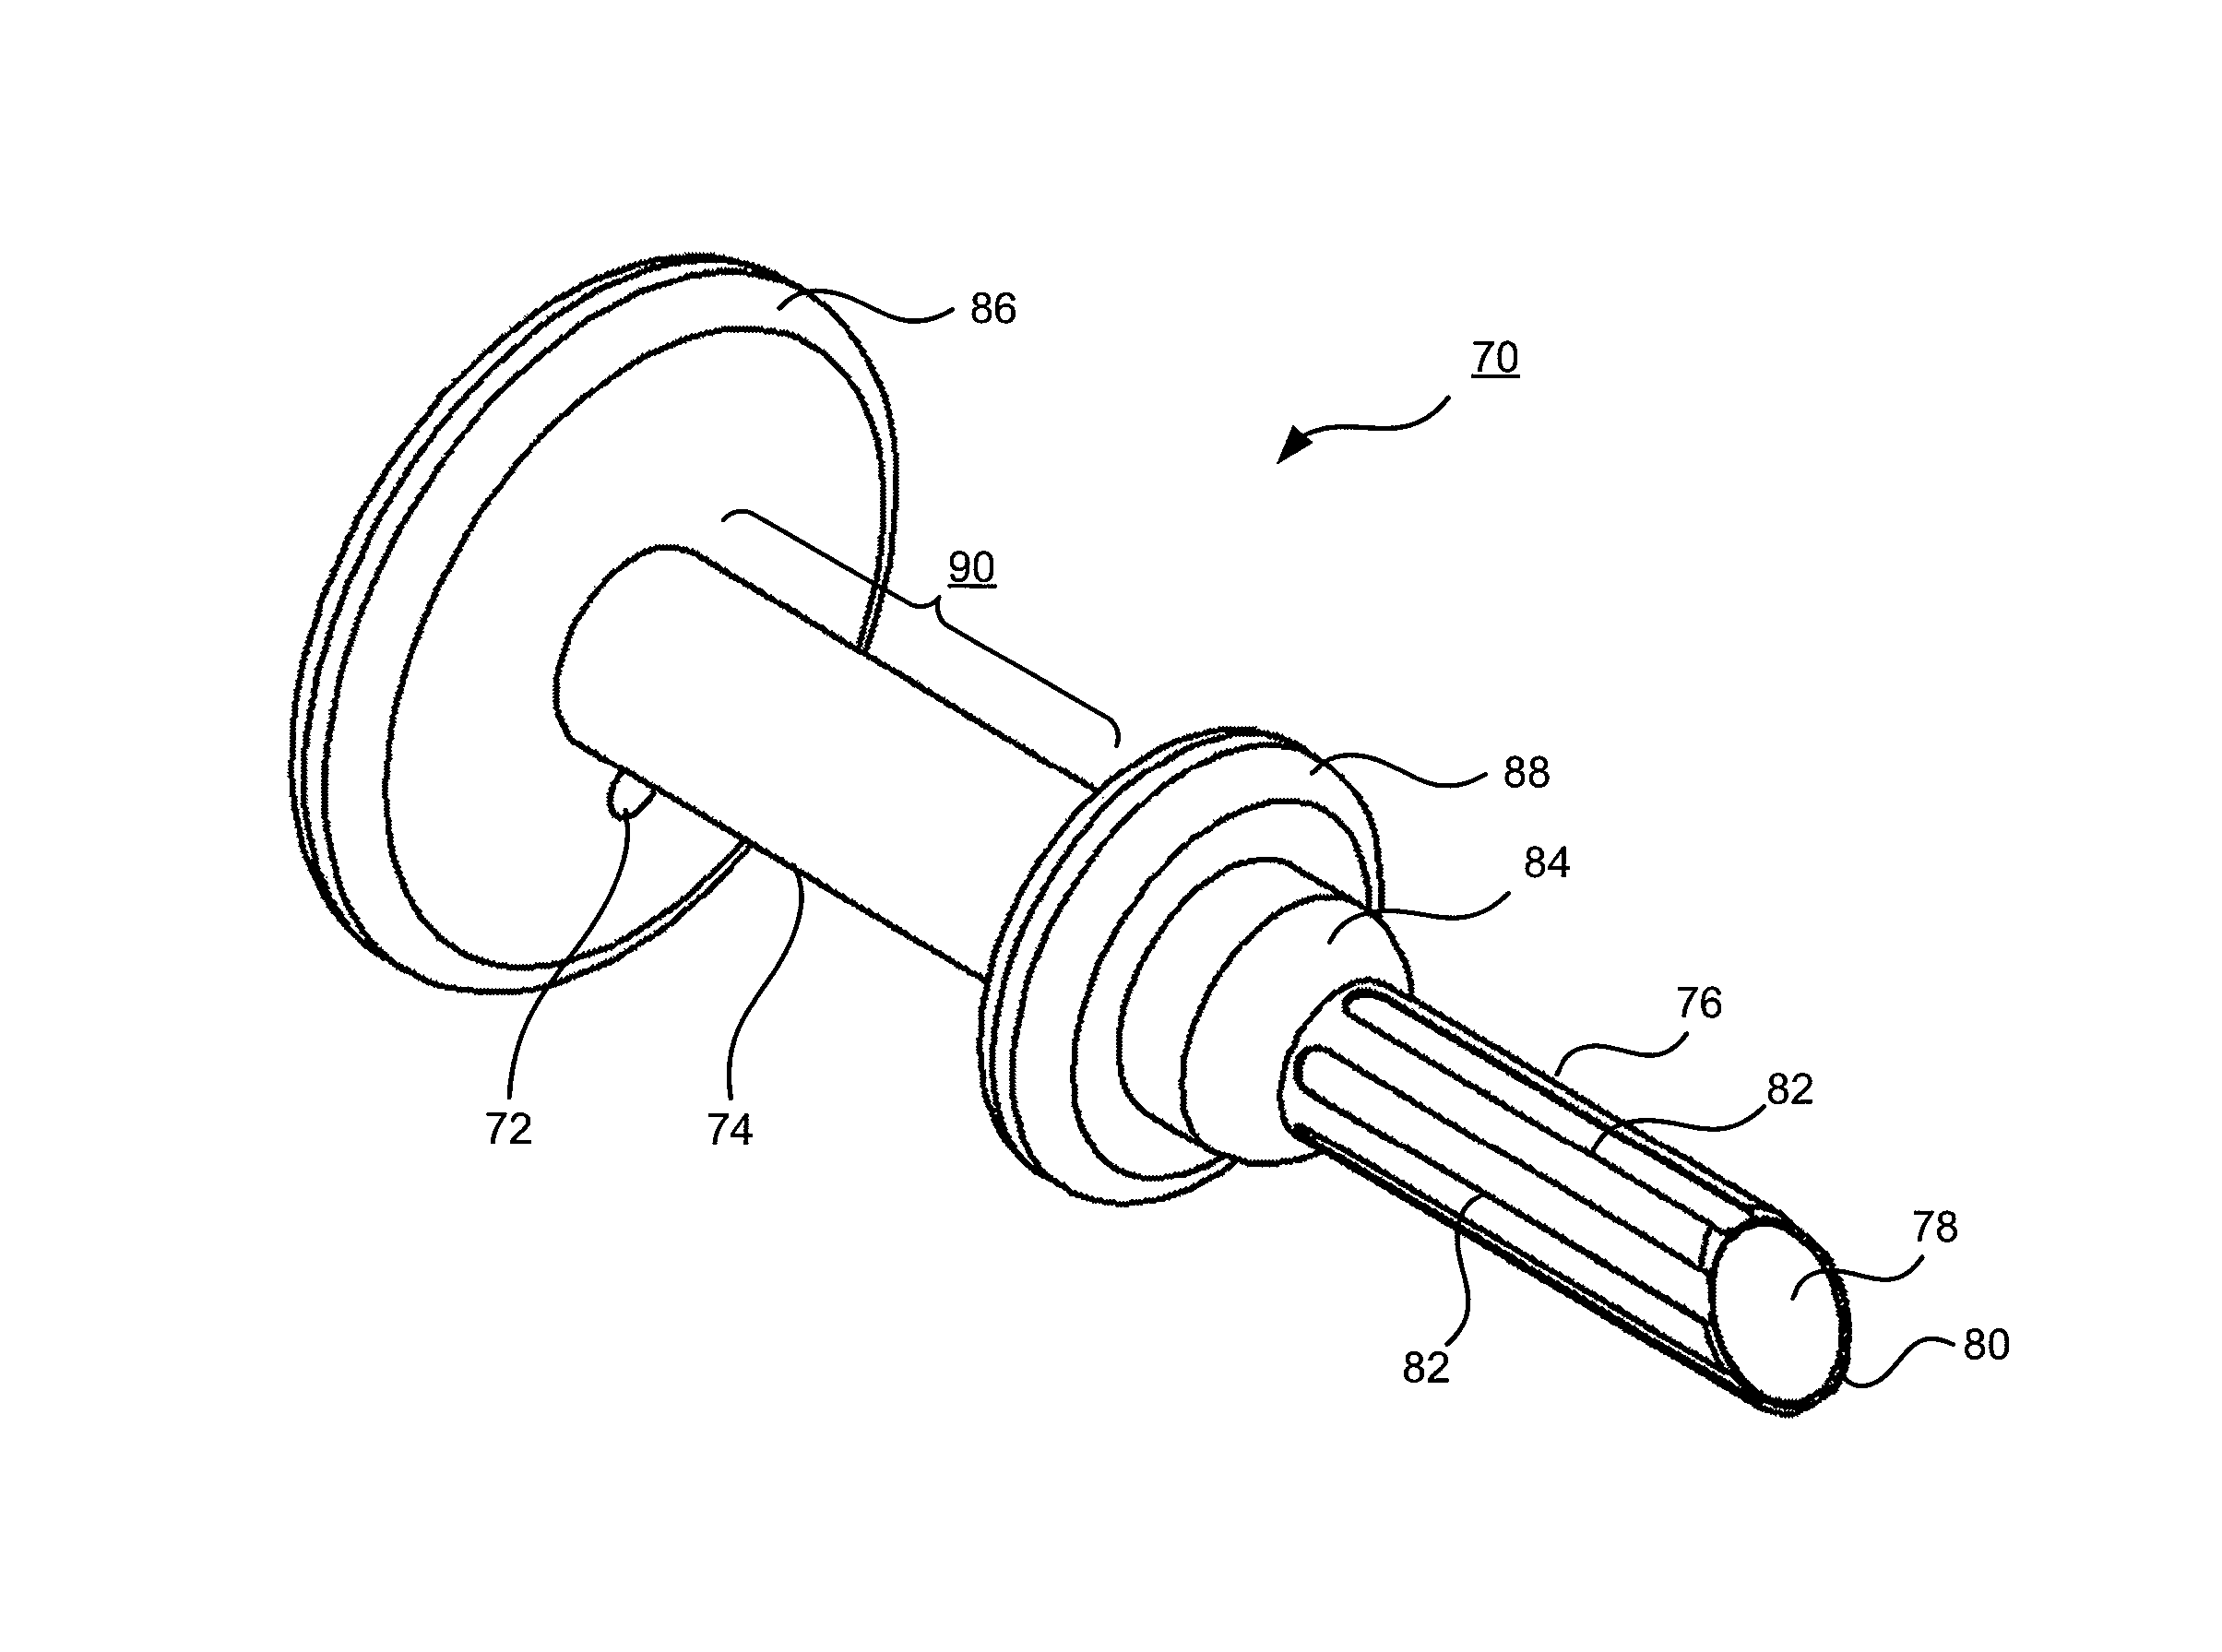 Apparatus and method for accessing a sinus cavity